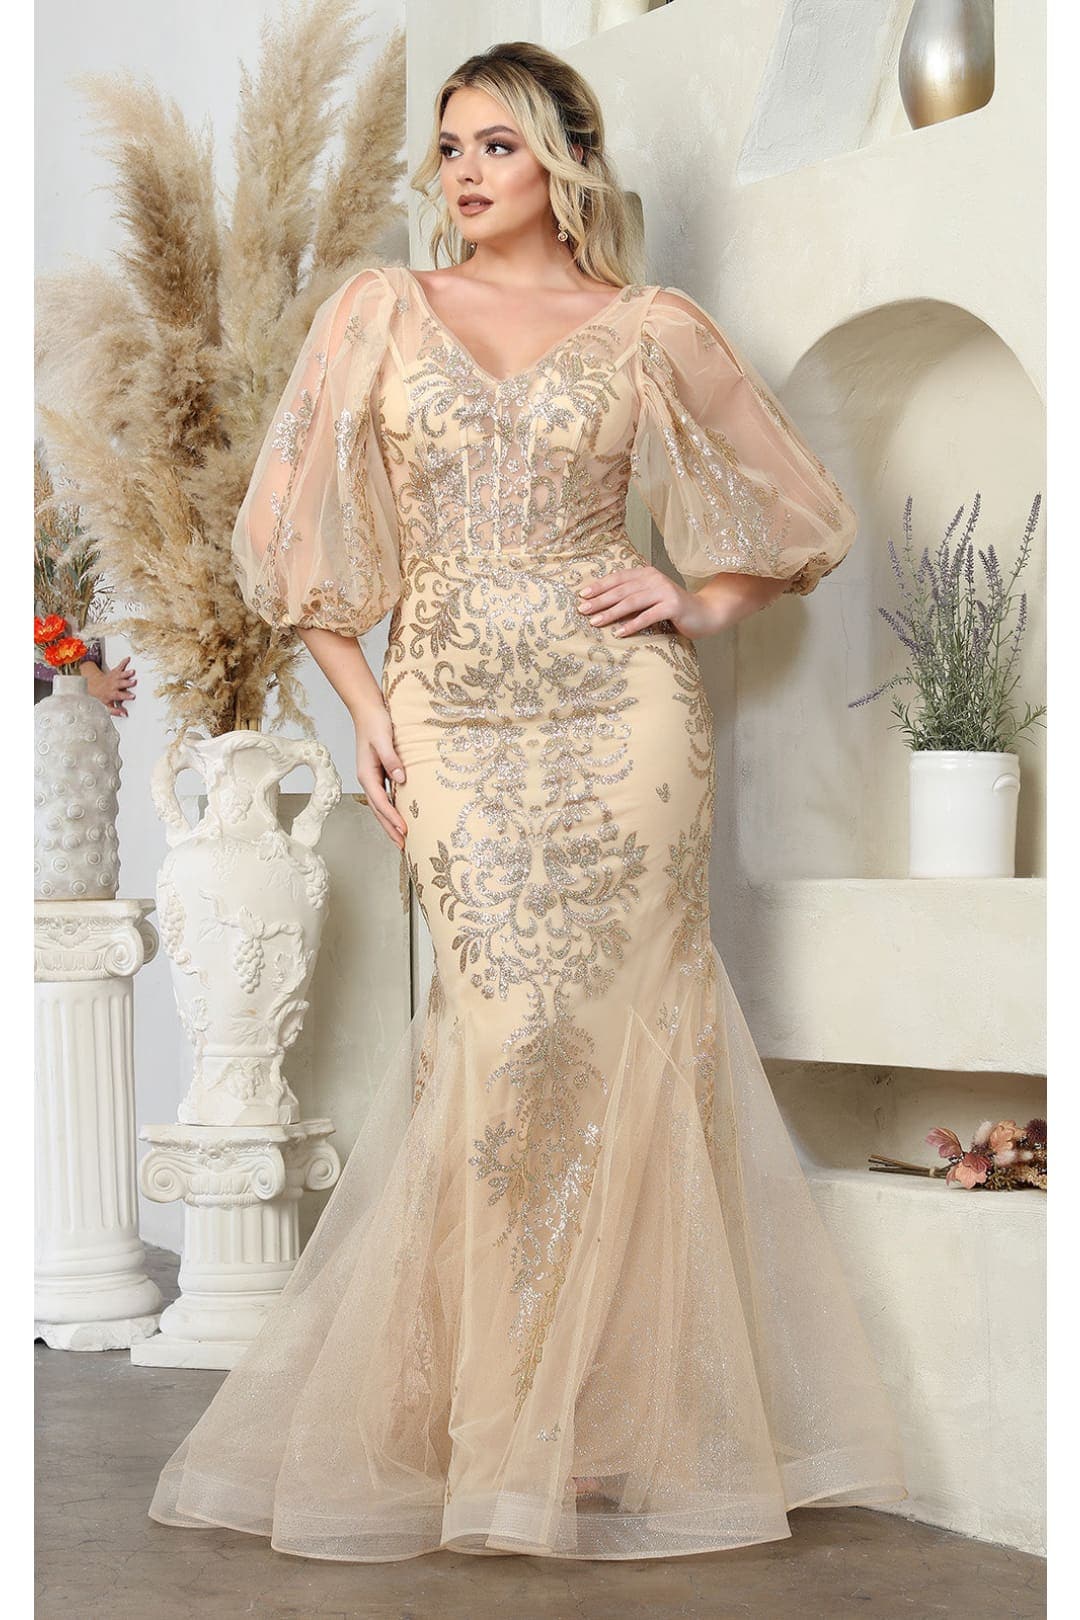 May Queen MQ2010 Puff Sleeves Plus Size Mermaid Formal Evening Gown - Dress